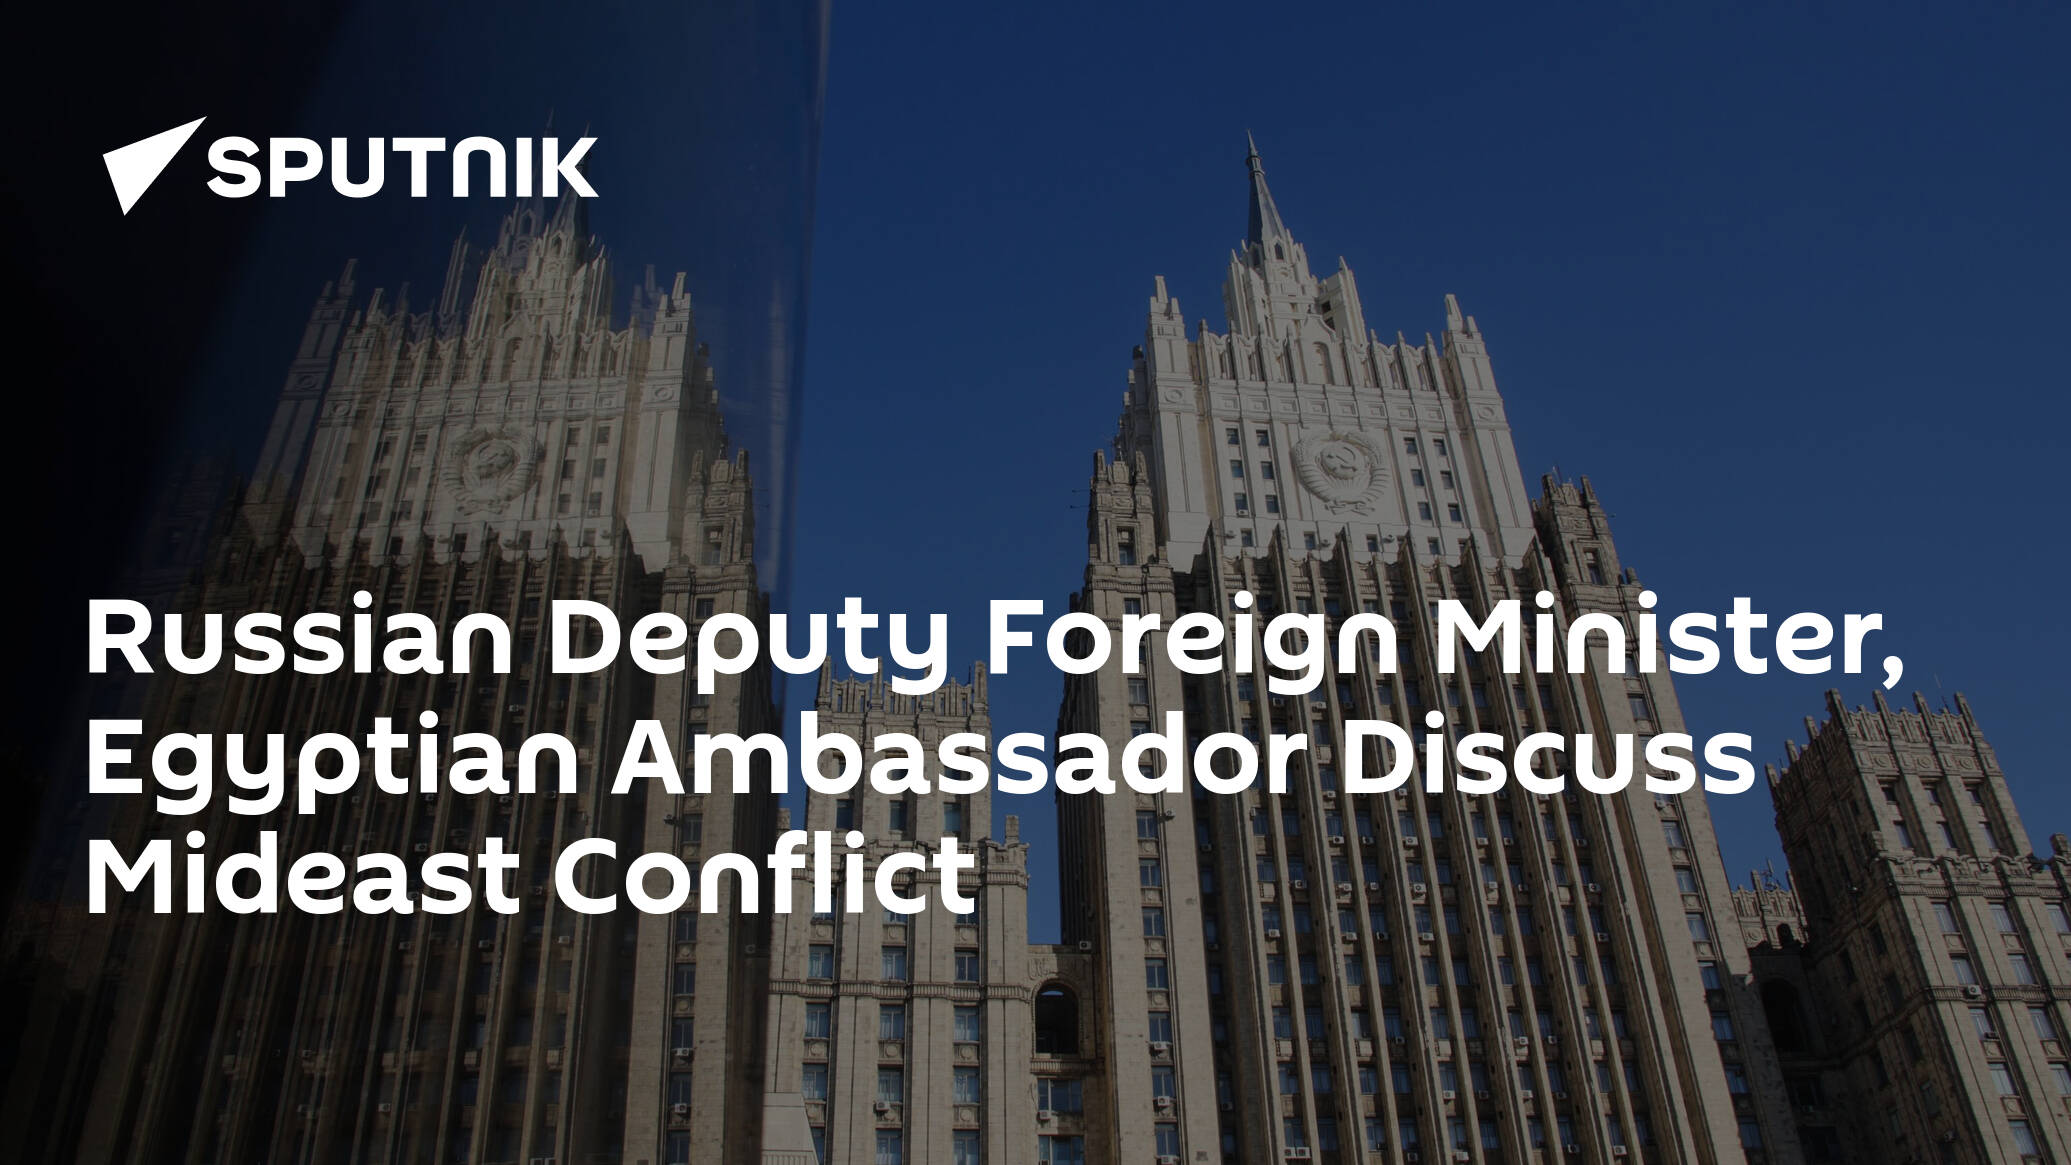 Russian Deputy Foreign Minister, Egyptian Ambassador Discuss Mideast Conflict